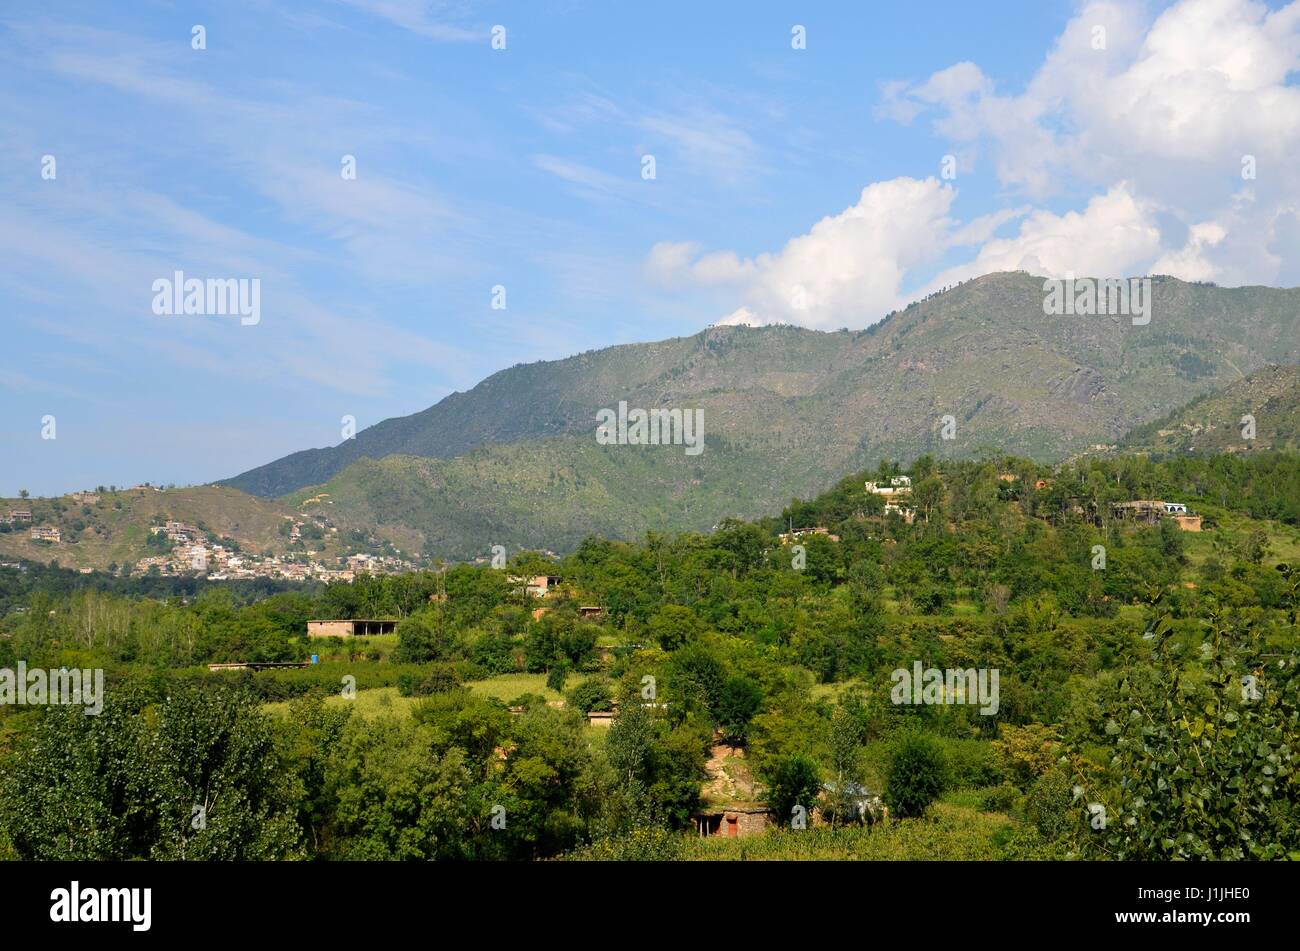 Mountains sky and homes in rural village with greenery of Swat Valley Khyber Pakhtoonkhwa Pakistan Stock Photo